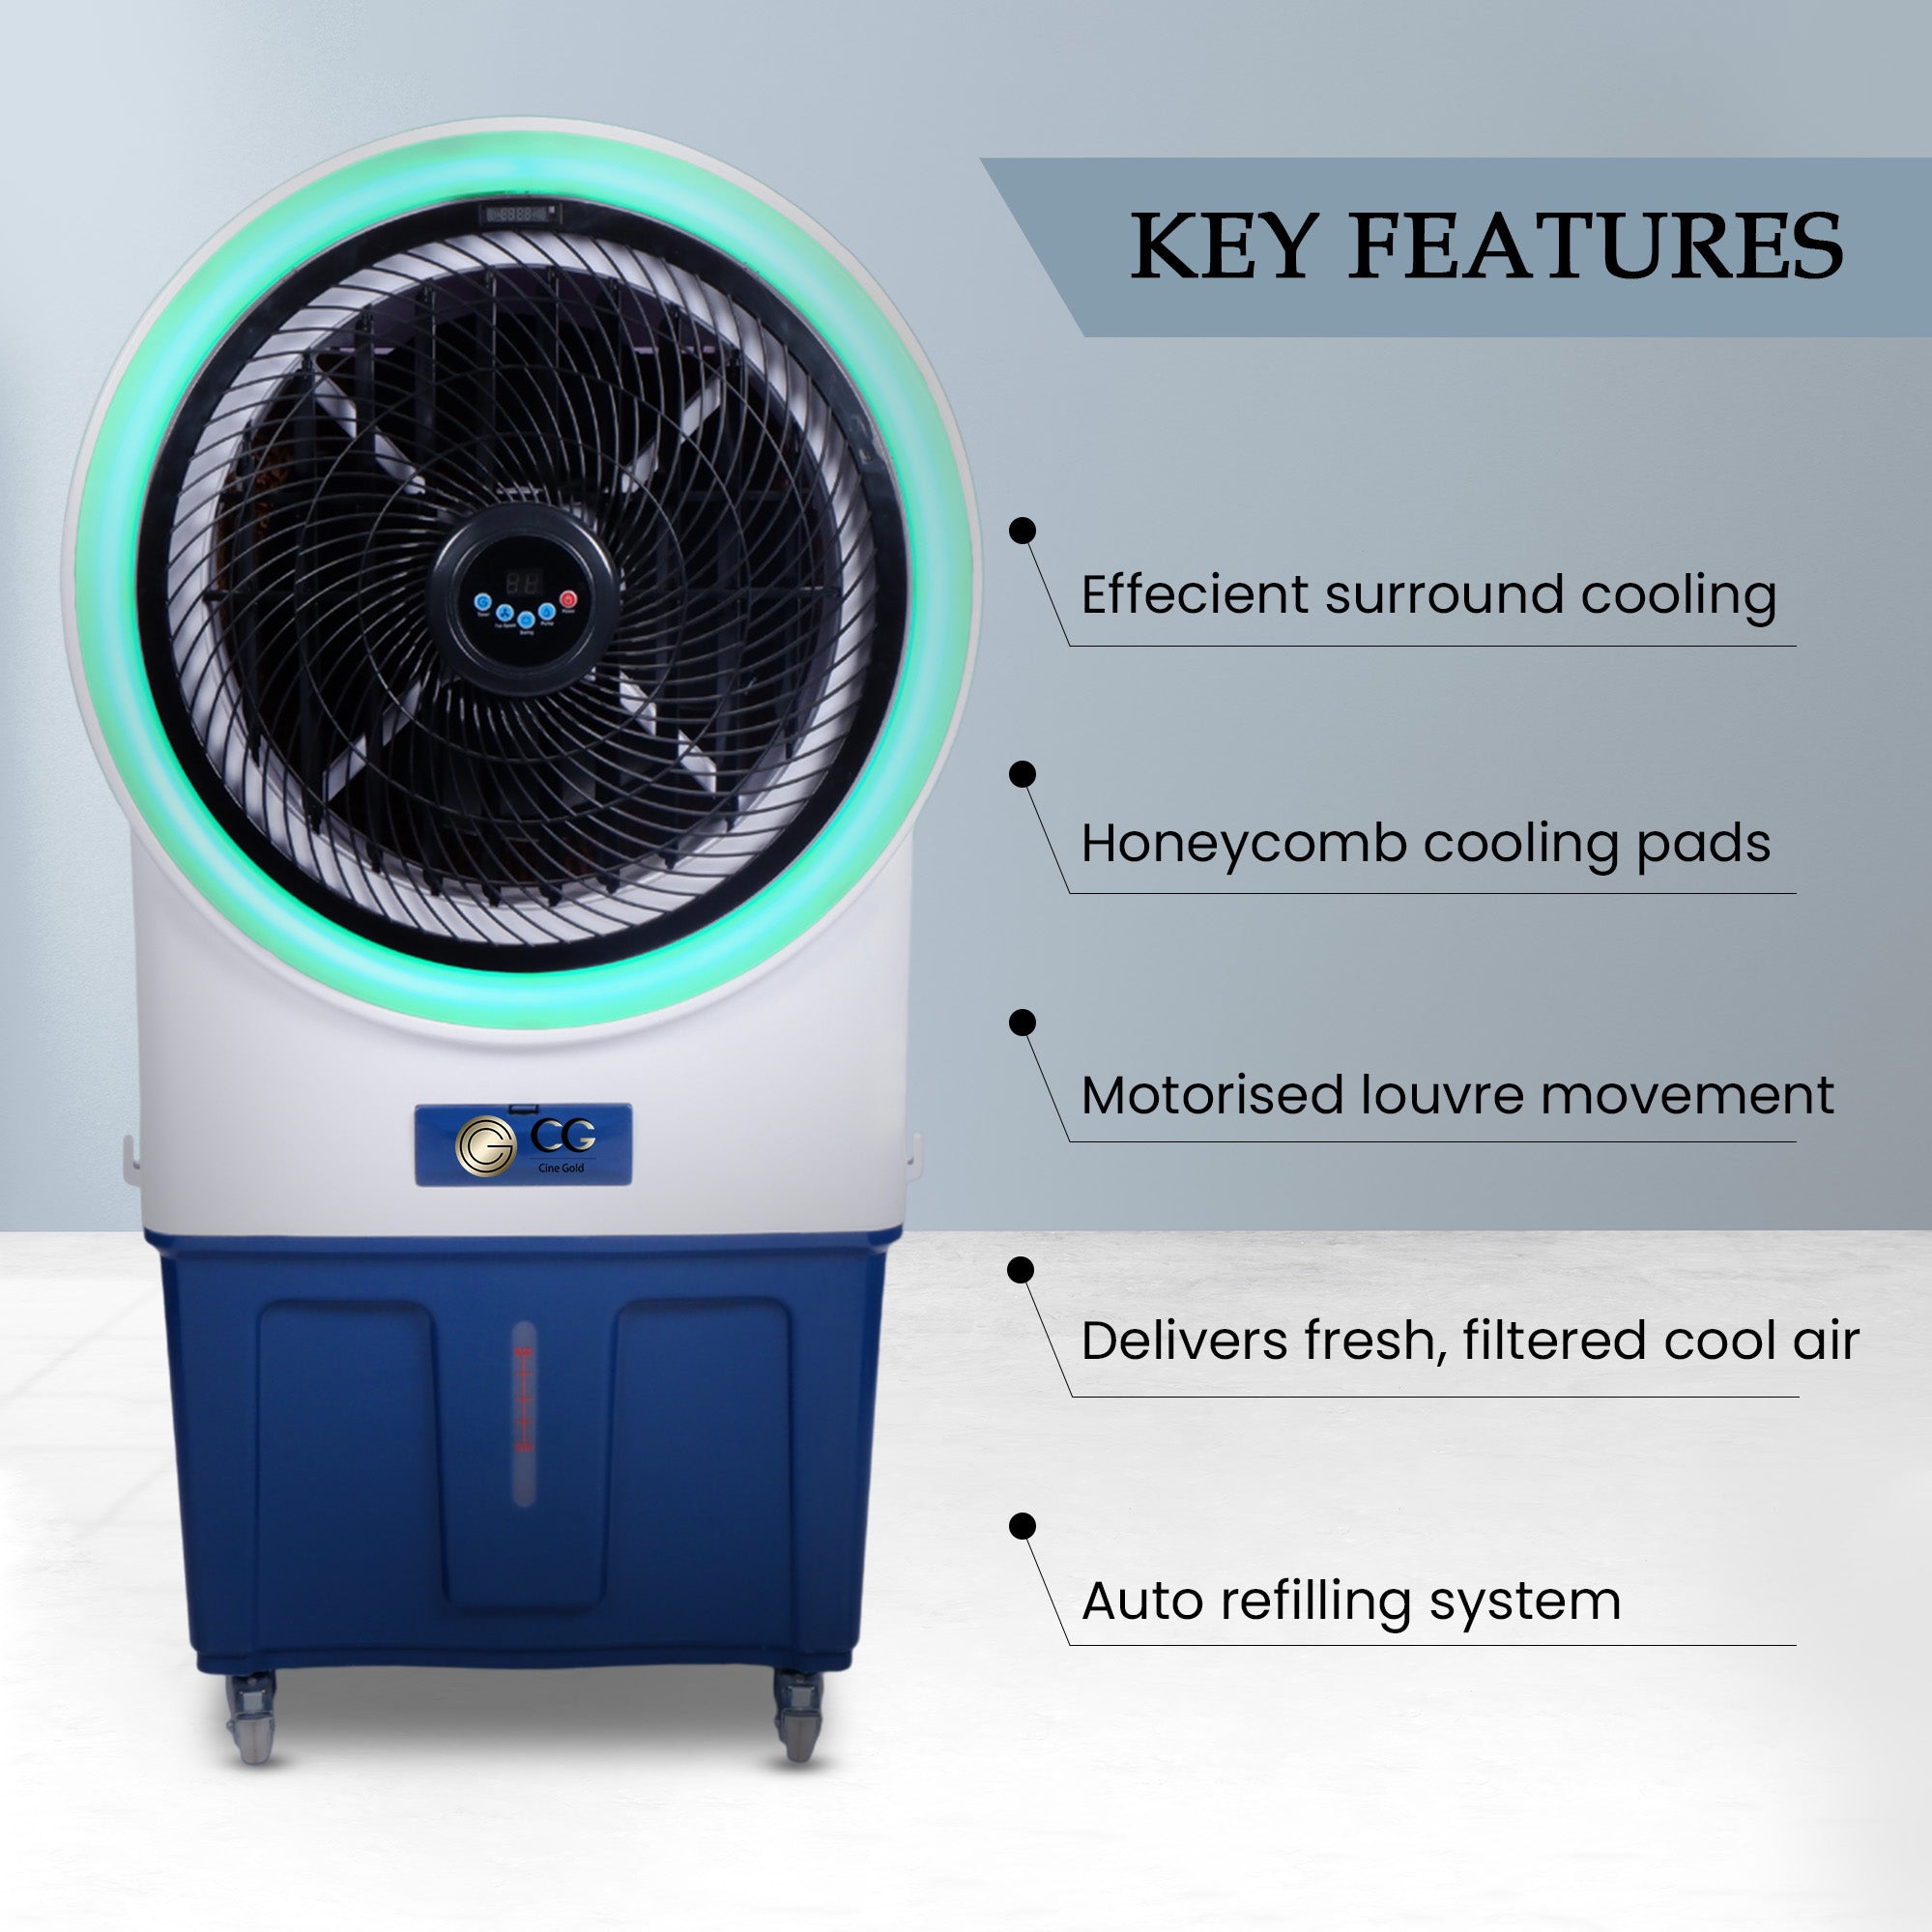 Cine Gold Oreo Ambient Light 80 LTRS  Heavy Duty Tower Air Cooler For Home/Office With Honeycomb Cooling & Auto Swing Technology, Powerful Air Throw & 3-Speed Control With Ice Top Chamber White & Navy Blue